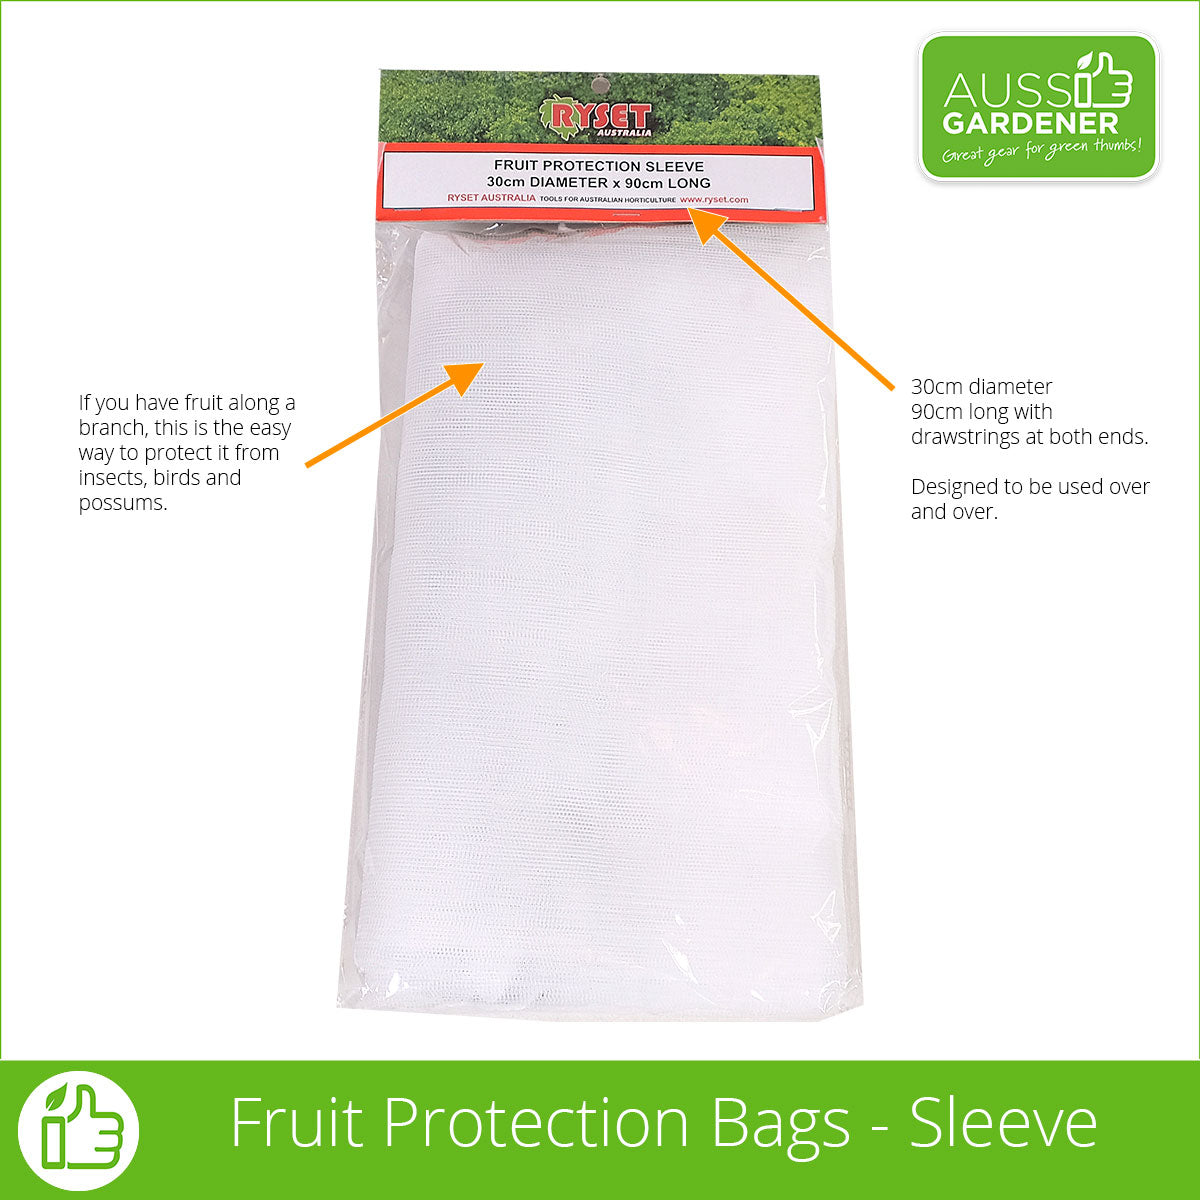 A pack of Fruit Protection Sleeves, 30cm x 90cm. for protection fruit and veggies from pests